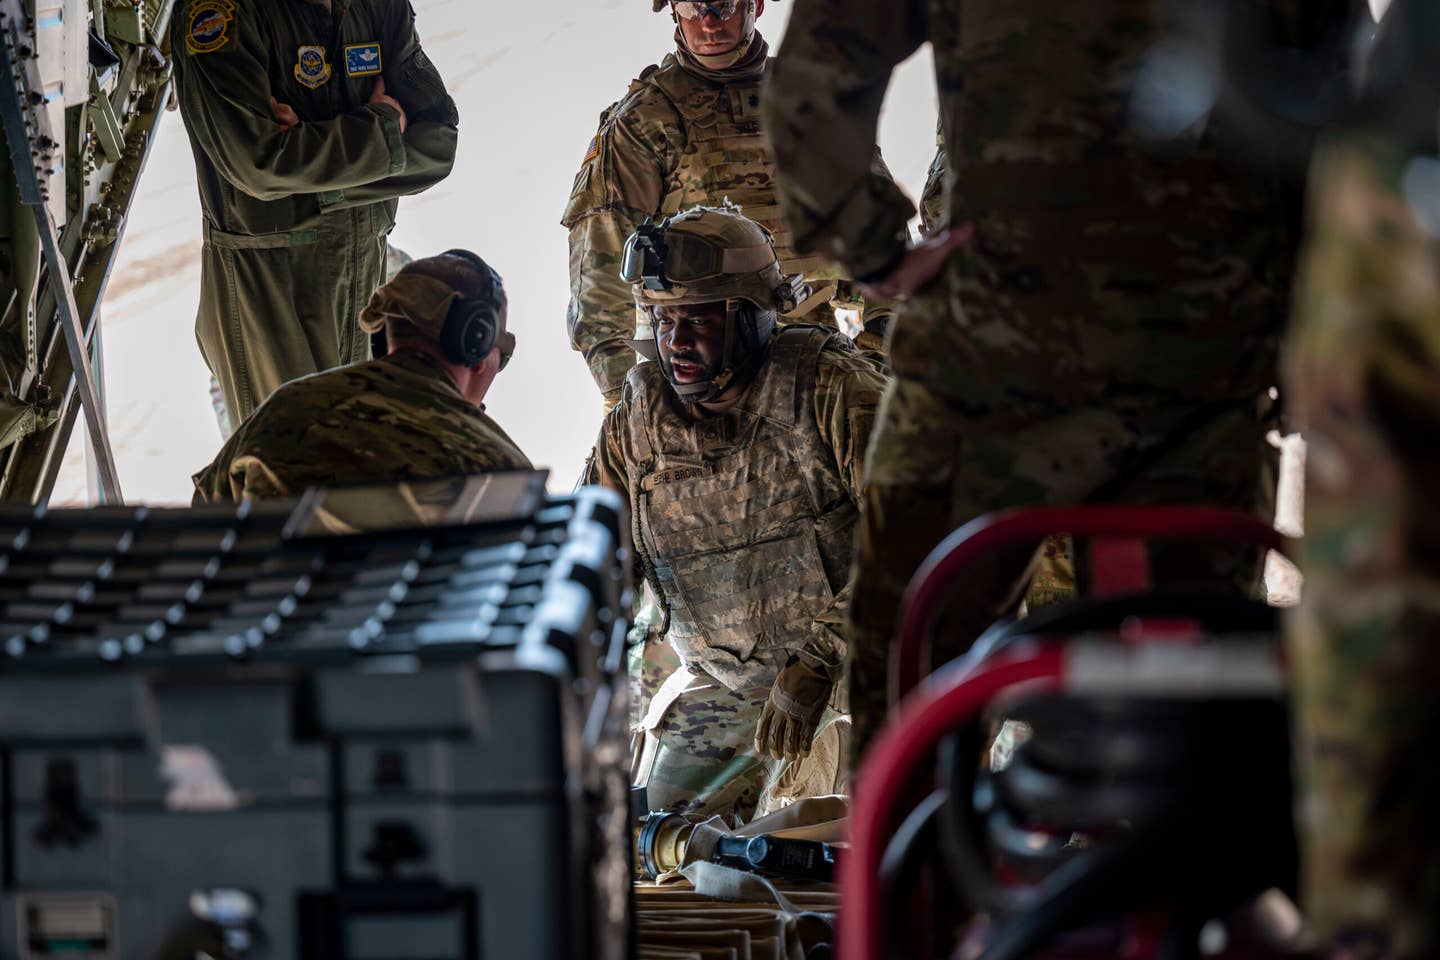 U.S. Army members assigned to the 1st Armored Division discuss preparations with 40th Airlift Squadron airmen to refuel an M1A2 Abrams tank at Fort Bliss. <em>Credit: U.S. Air Force photo by Senior Airman Leon Redfern</em>